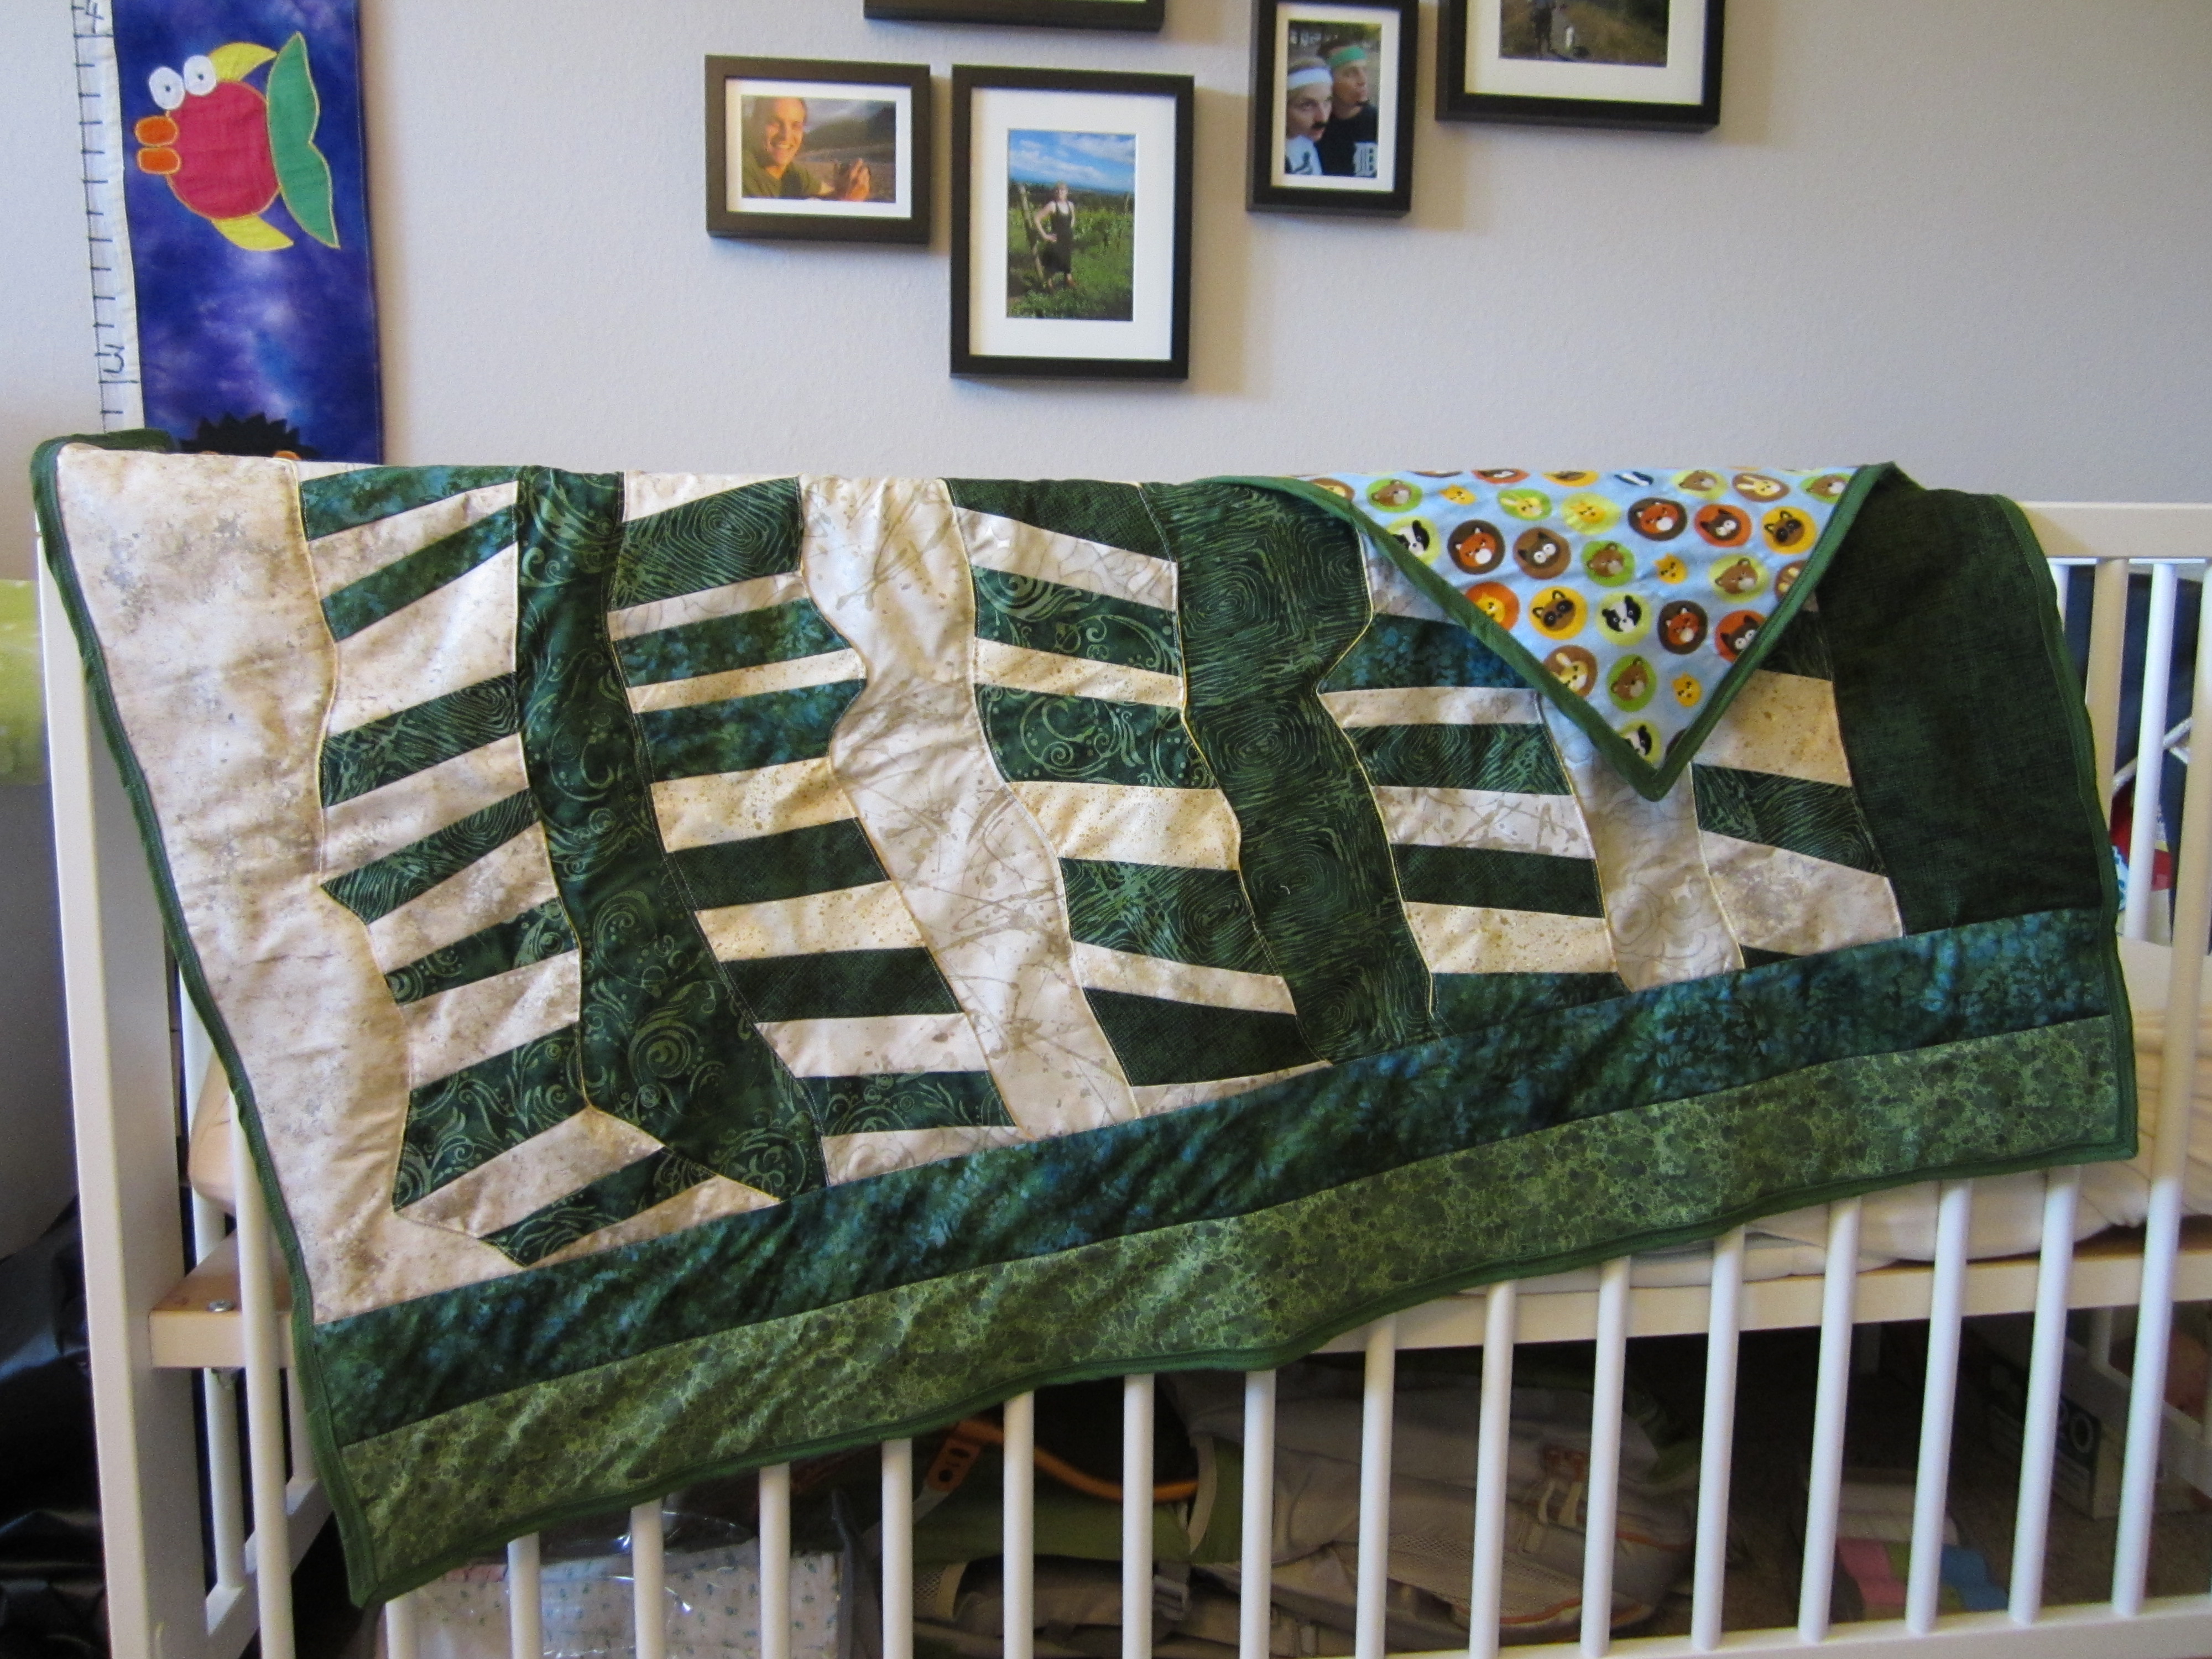 Shannon's nursery has a Montana theme, so I wanted the quilt to look organic and woodsy.